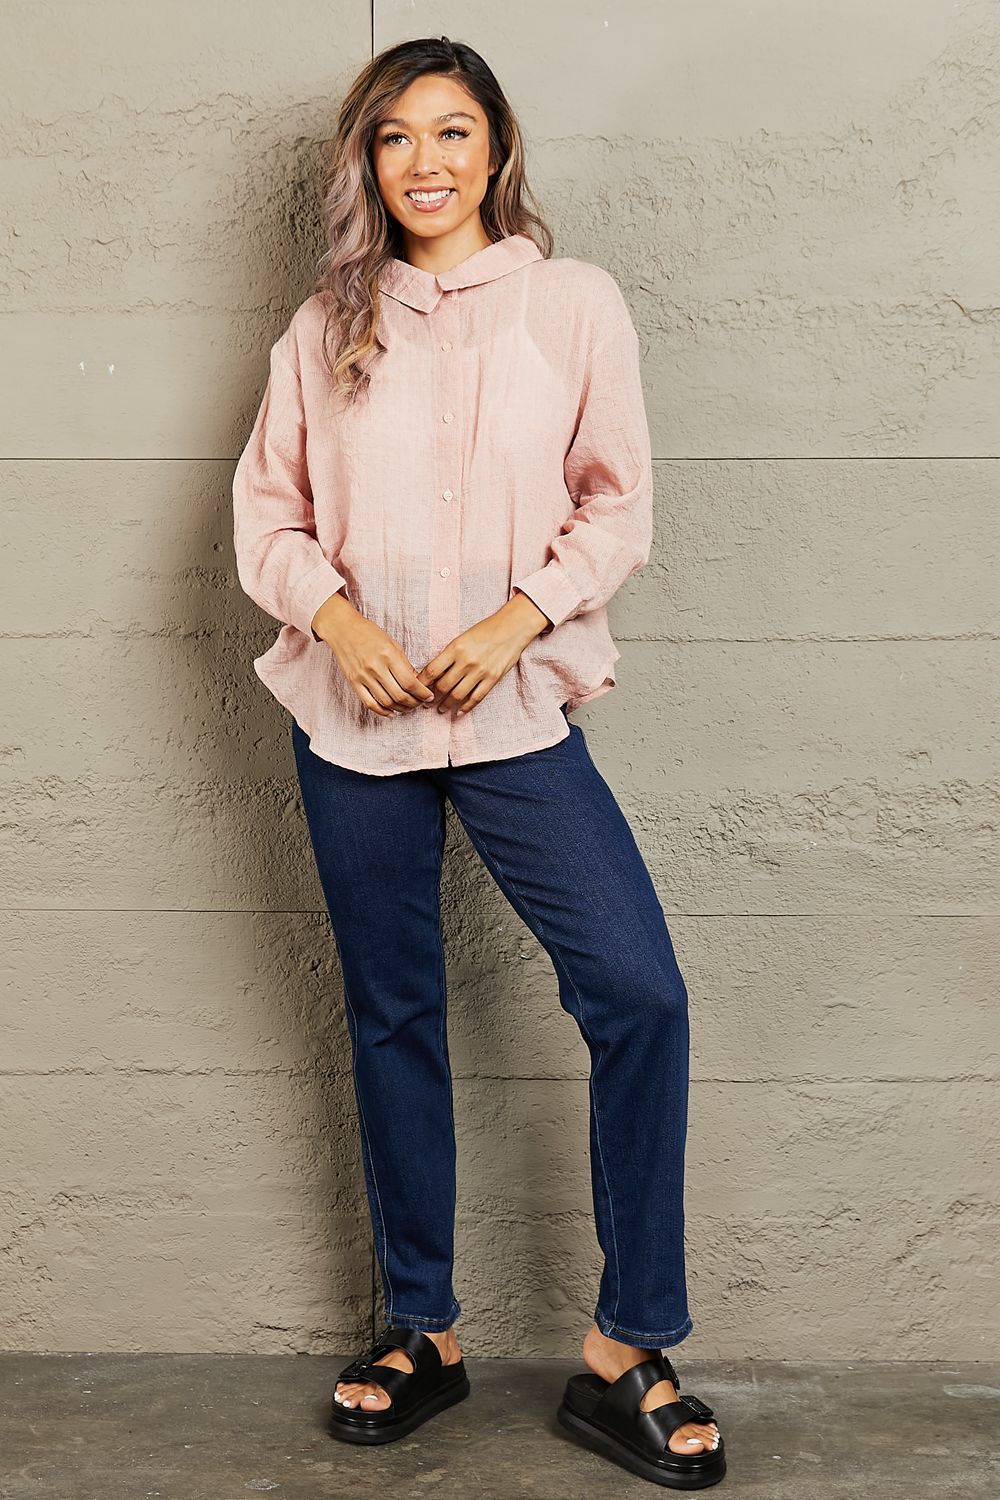 Take Me Out Lightweight Button Down Top